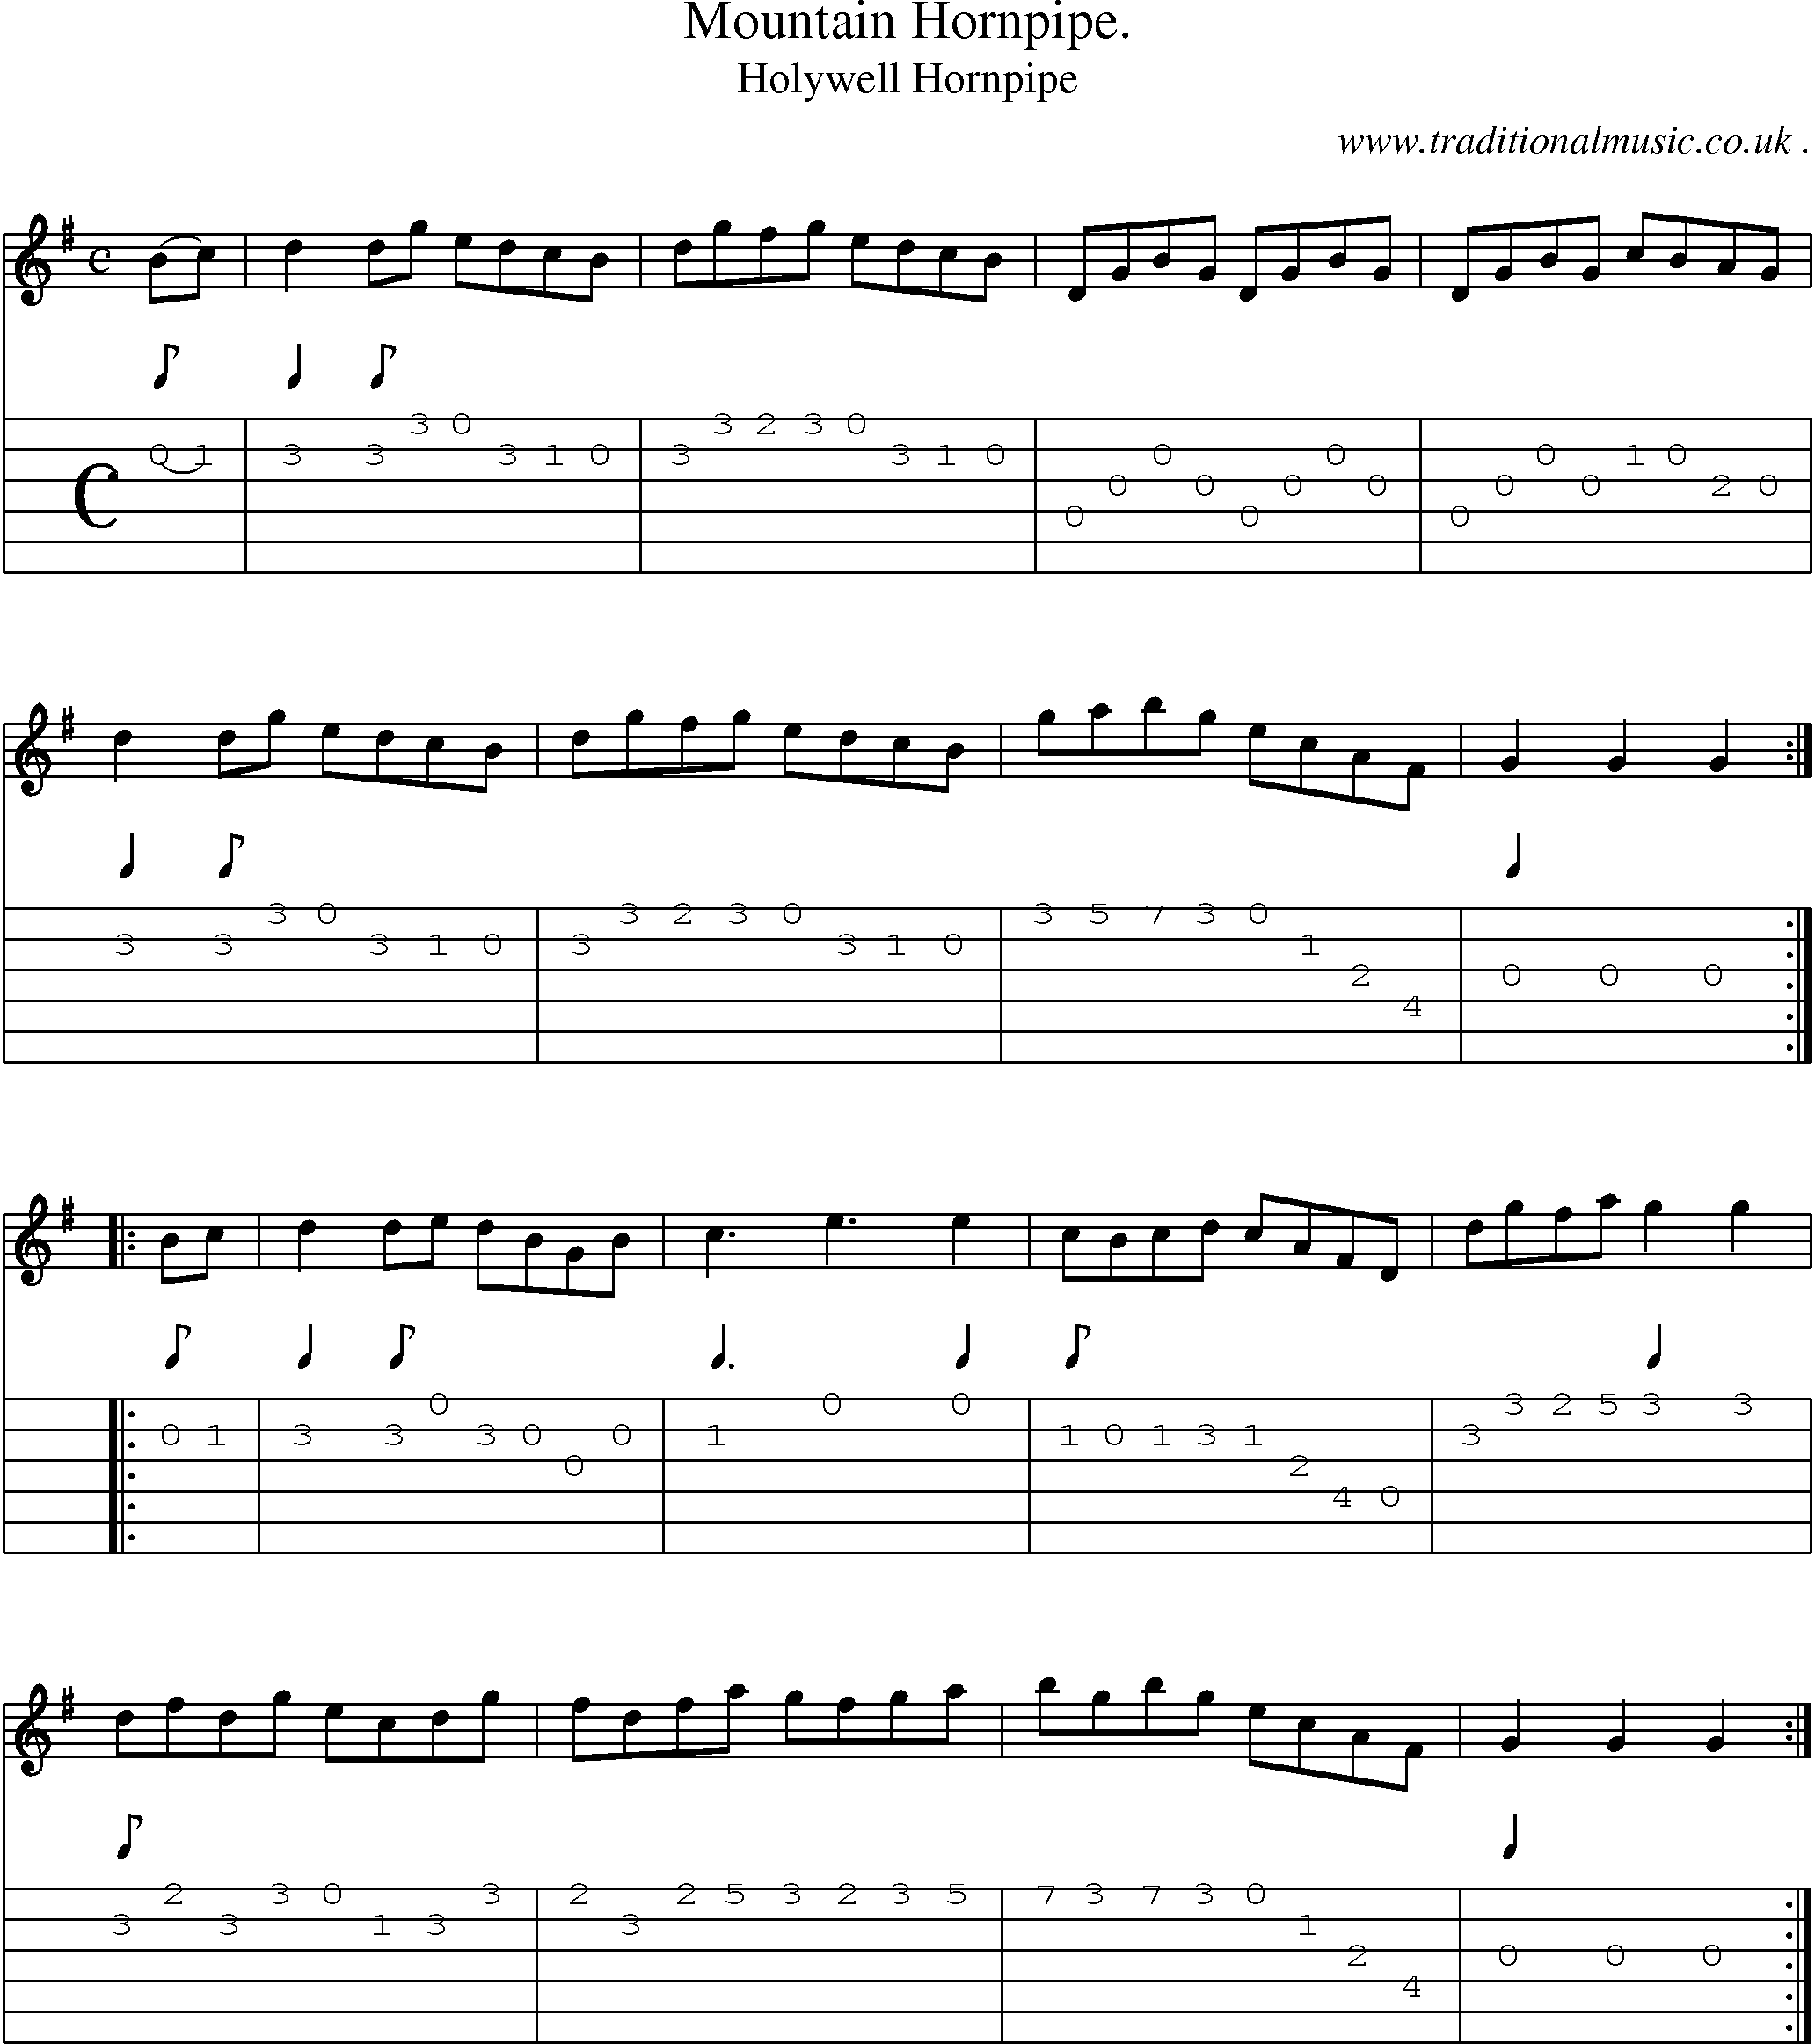 Sheet-Music and Guitar Tabs for Mountain Hornpipe